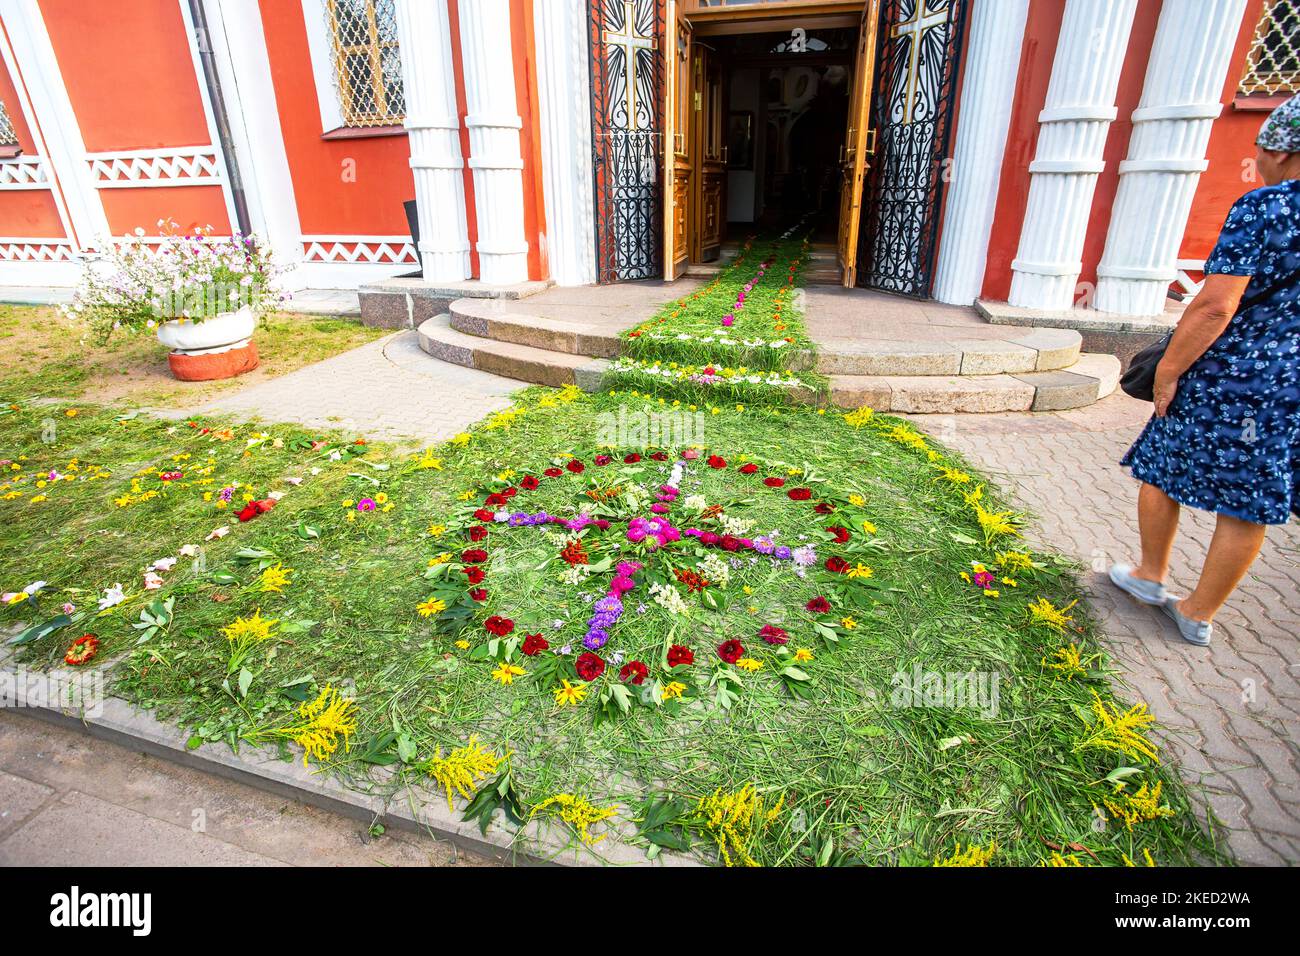 Entrance to an Orthodox church strewn with flowers and grass. Cathedral of the Resurrection of Christ in Staraya Russa, Russia Stock Photo